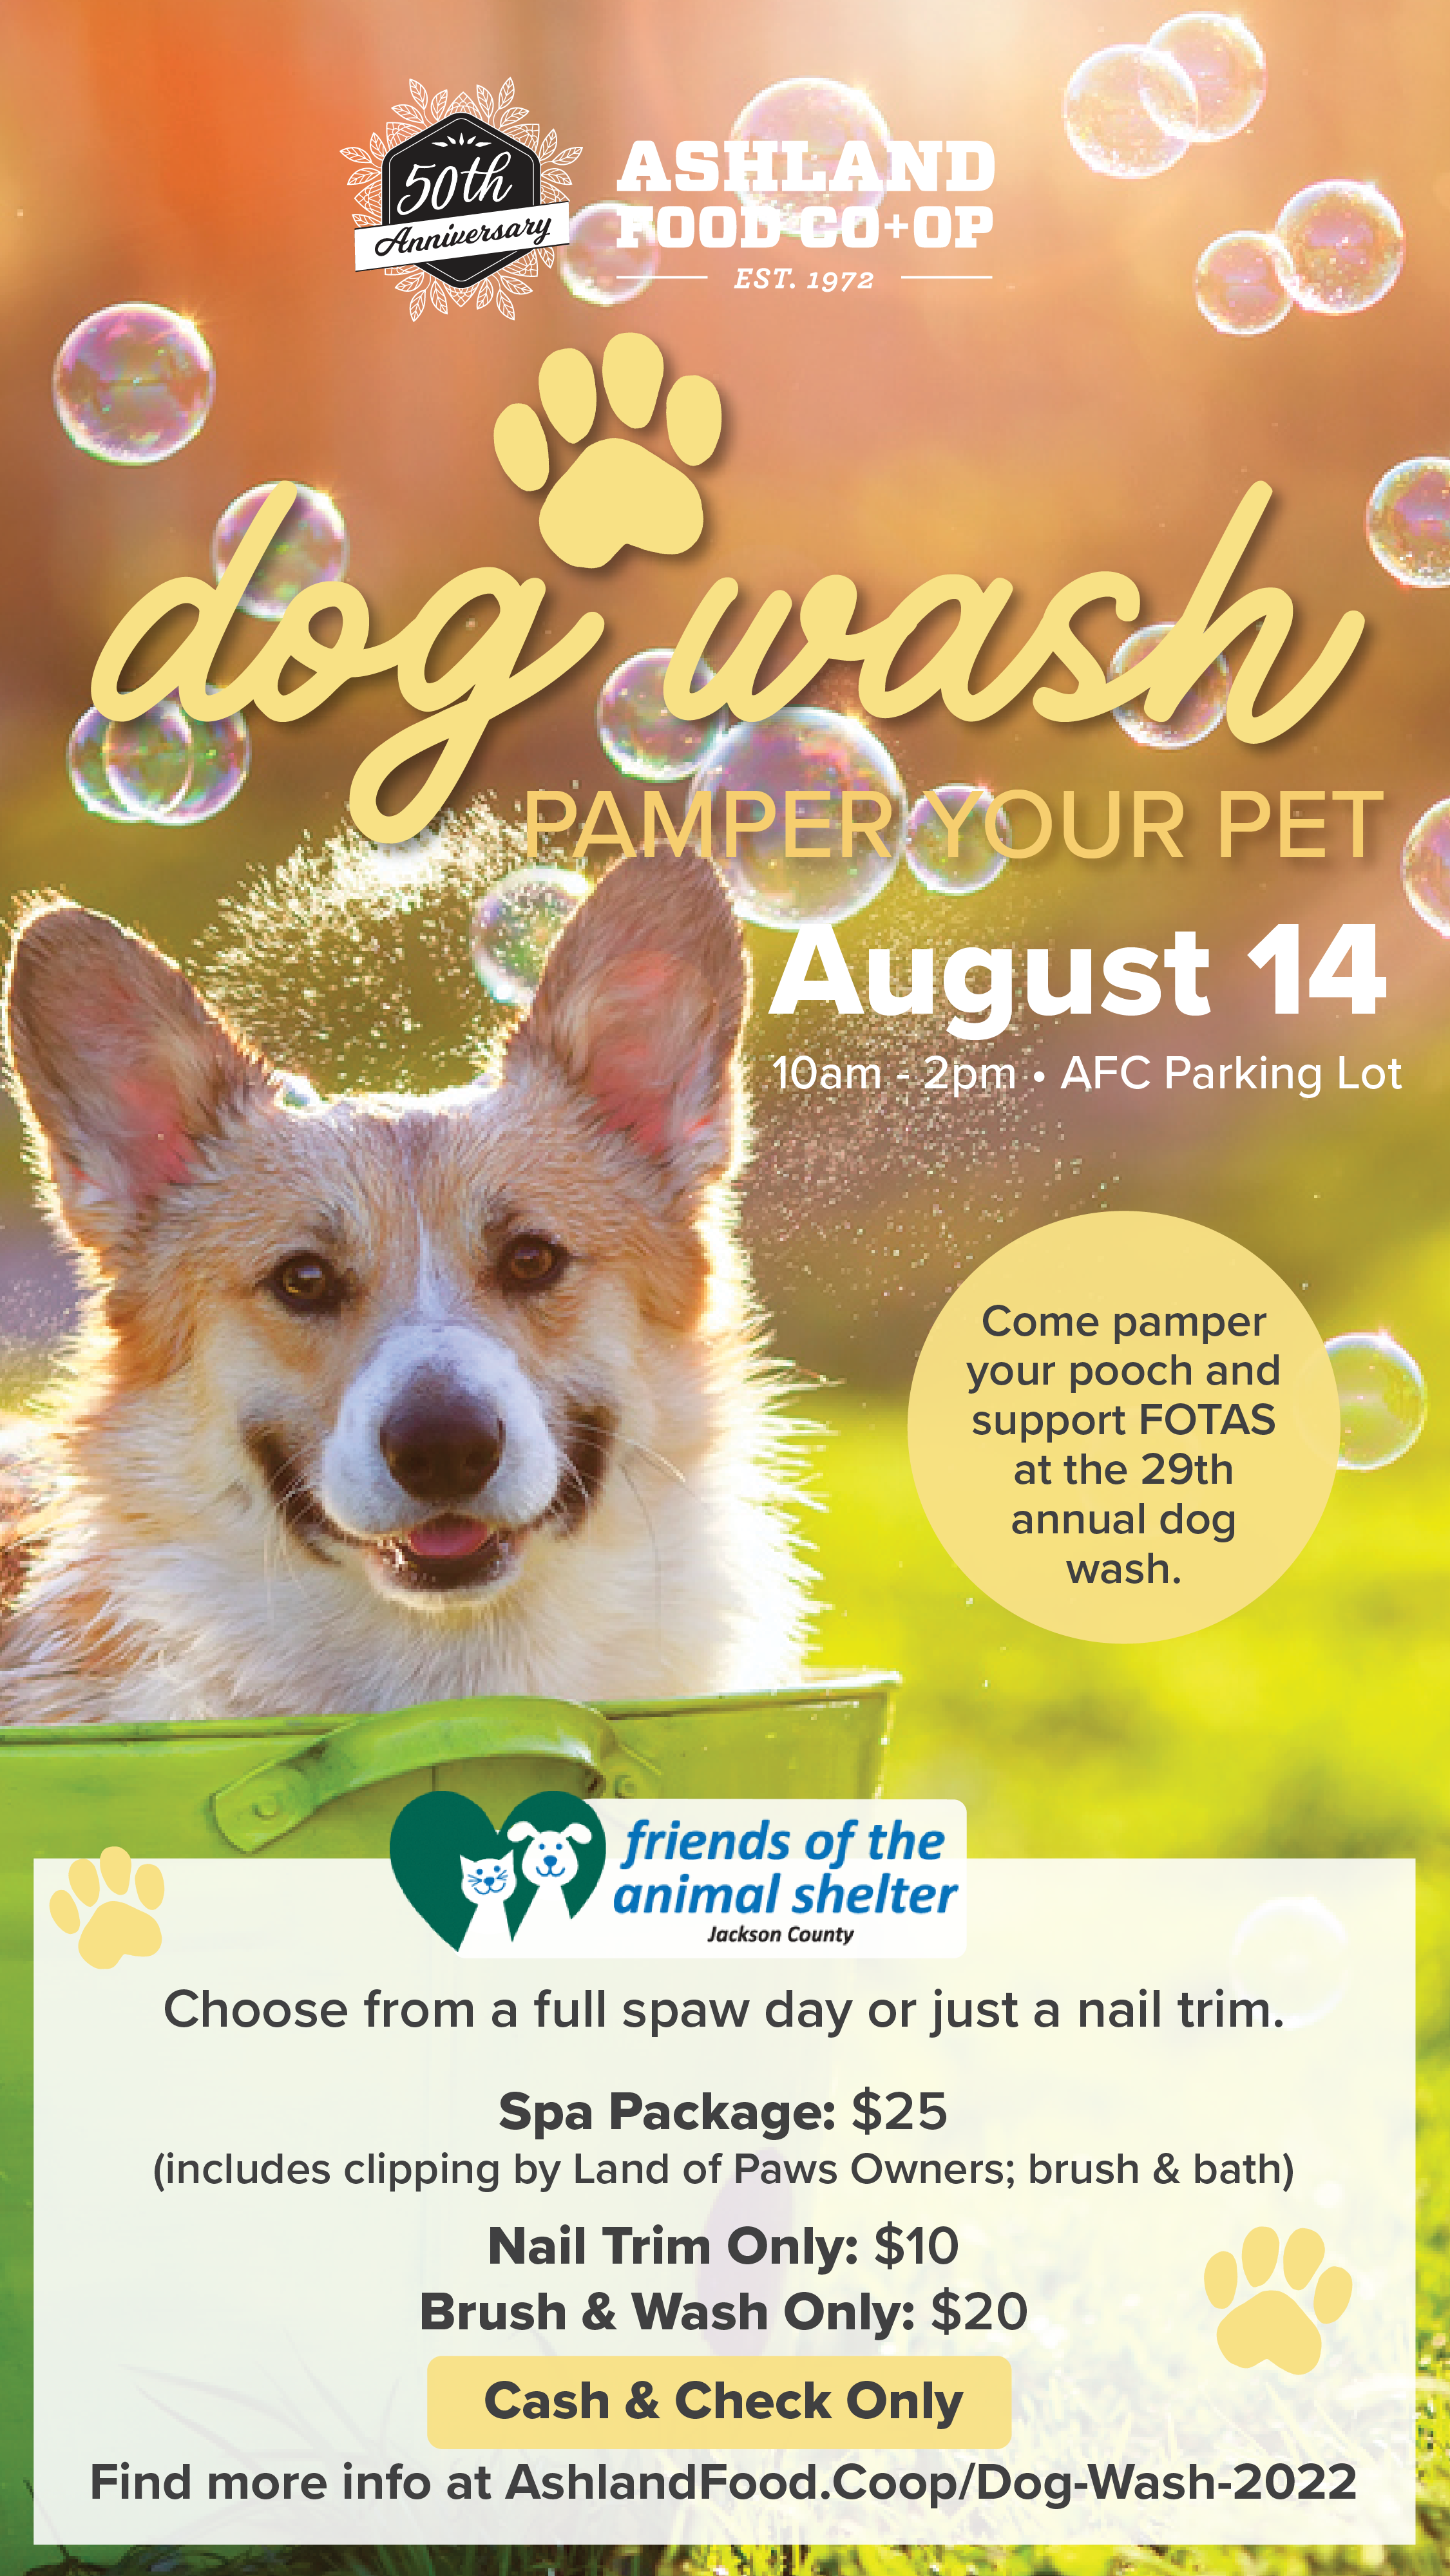 FOTAS Dog Wash is on August 14th at the Co-op!